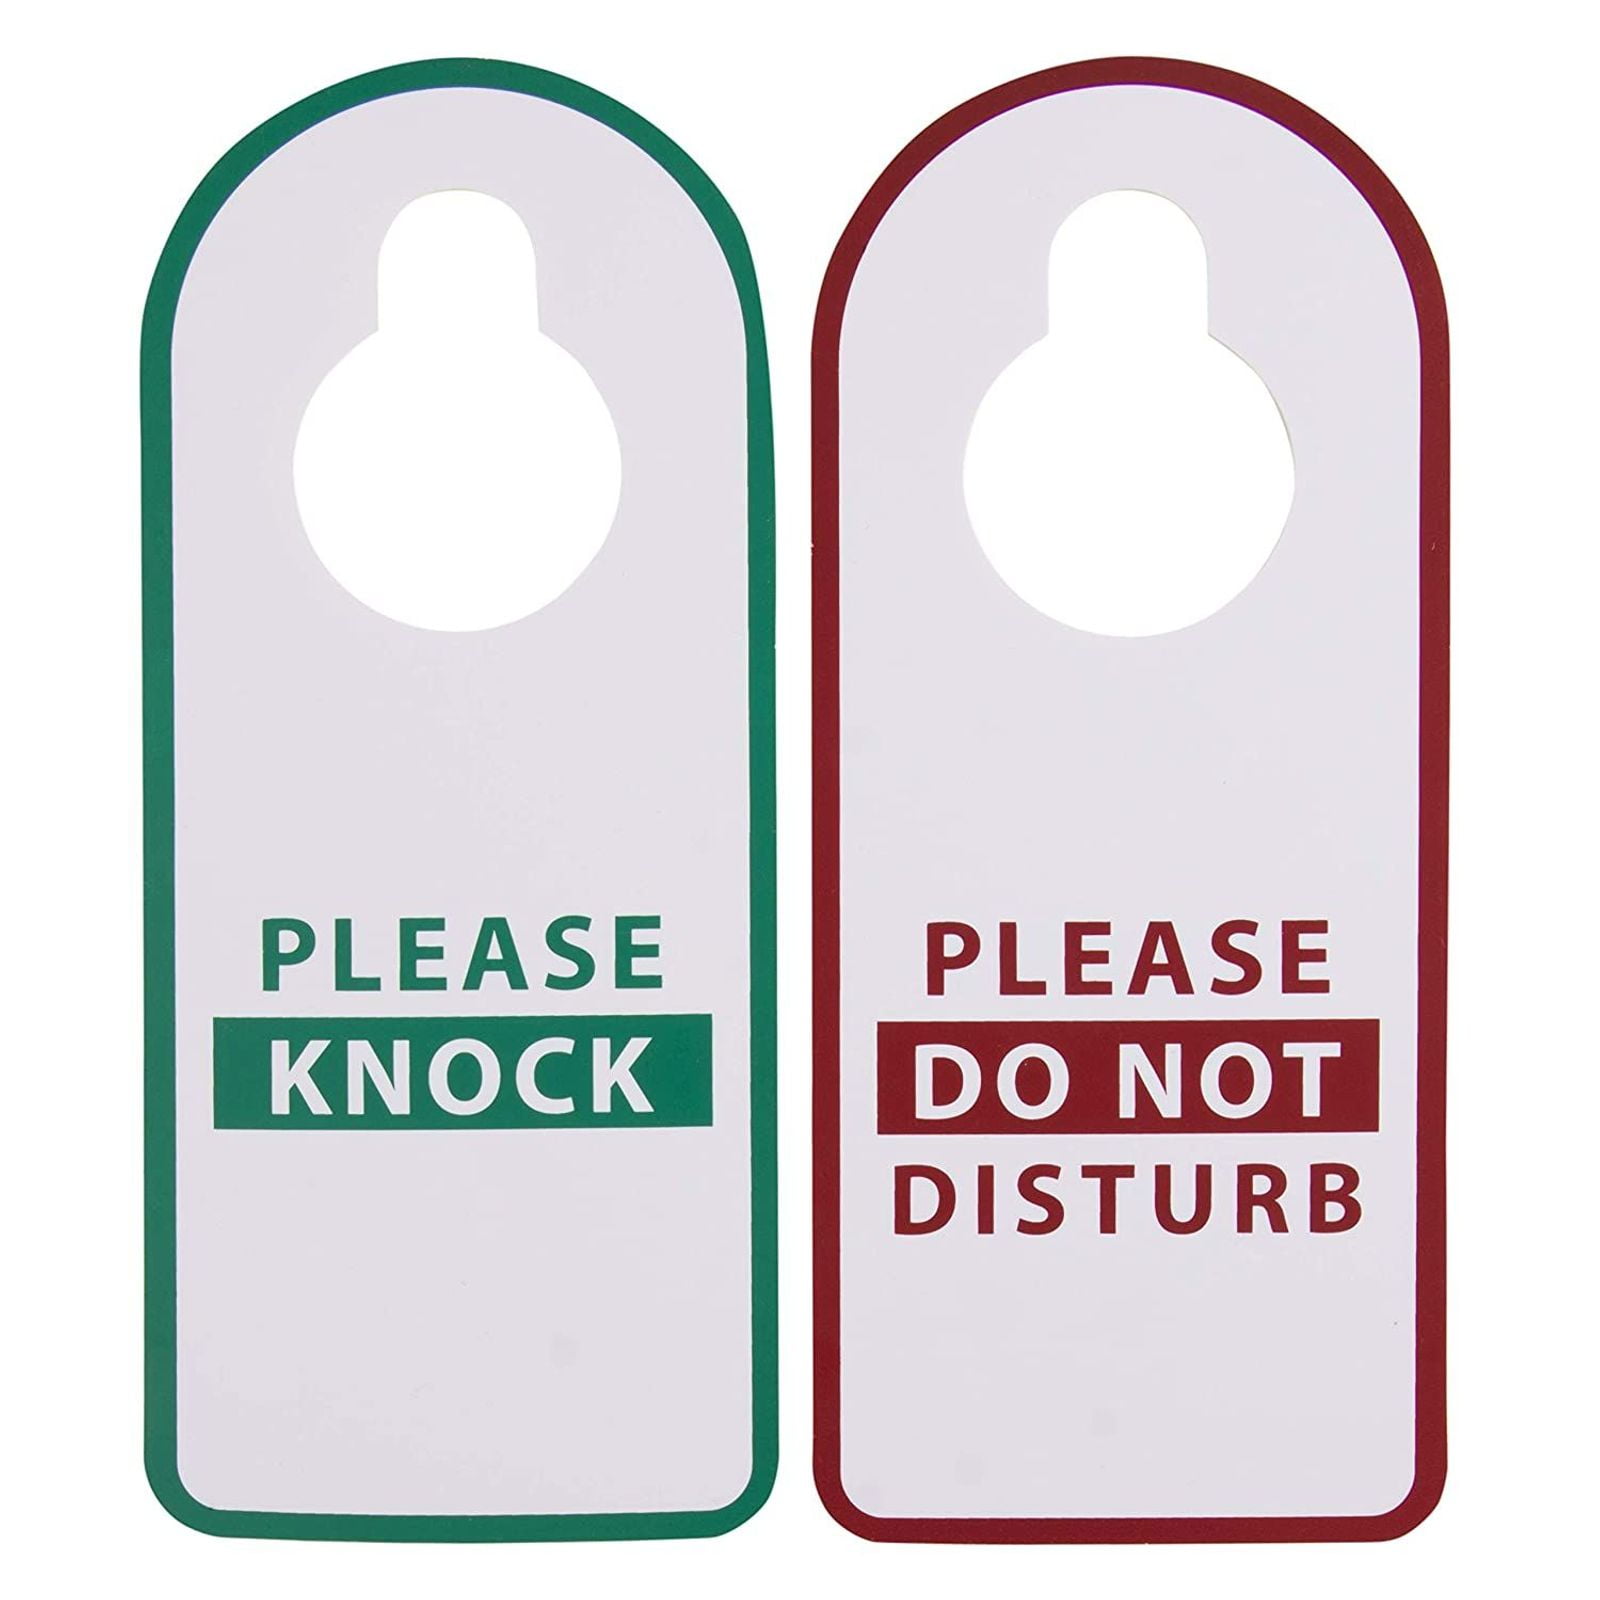 Double Sided School Inn 4 Packs Do Not Disturb Door Hanger Sign 9'' X 3.5'' Motel Idea for Hotel Please Make Up Room and Please Do Not Disturb Door Sign Nursing Home Professional Cleaner 